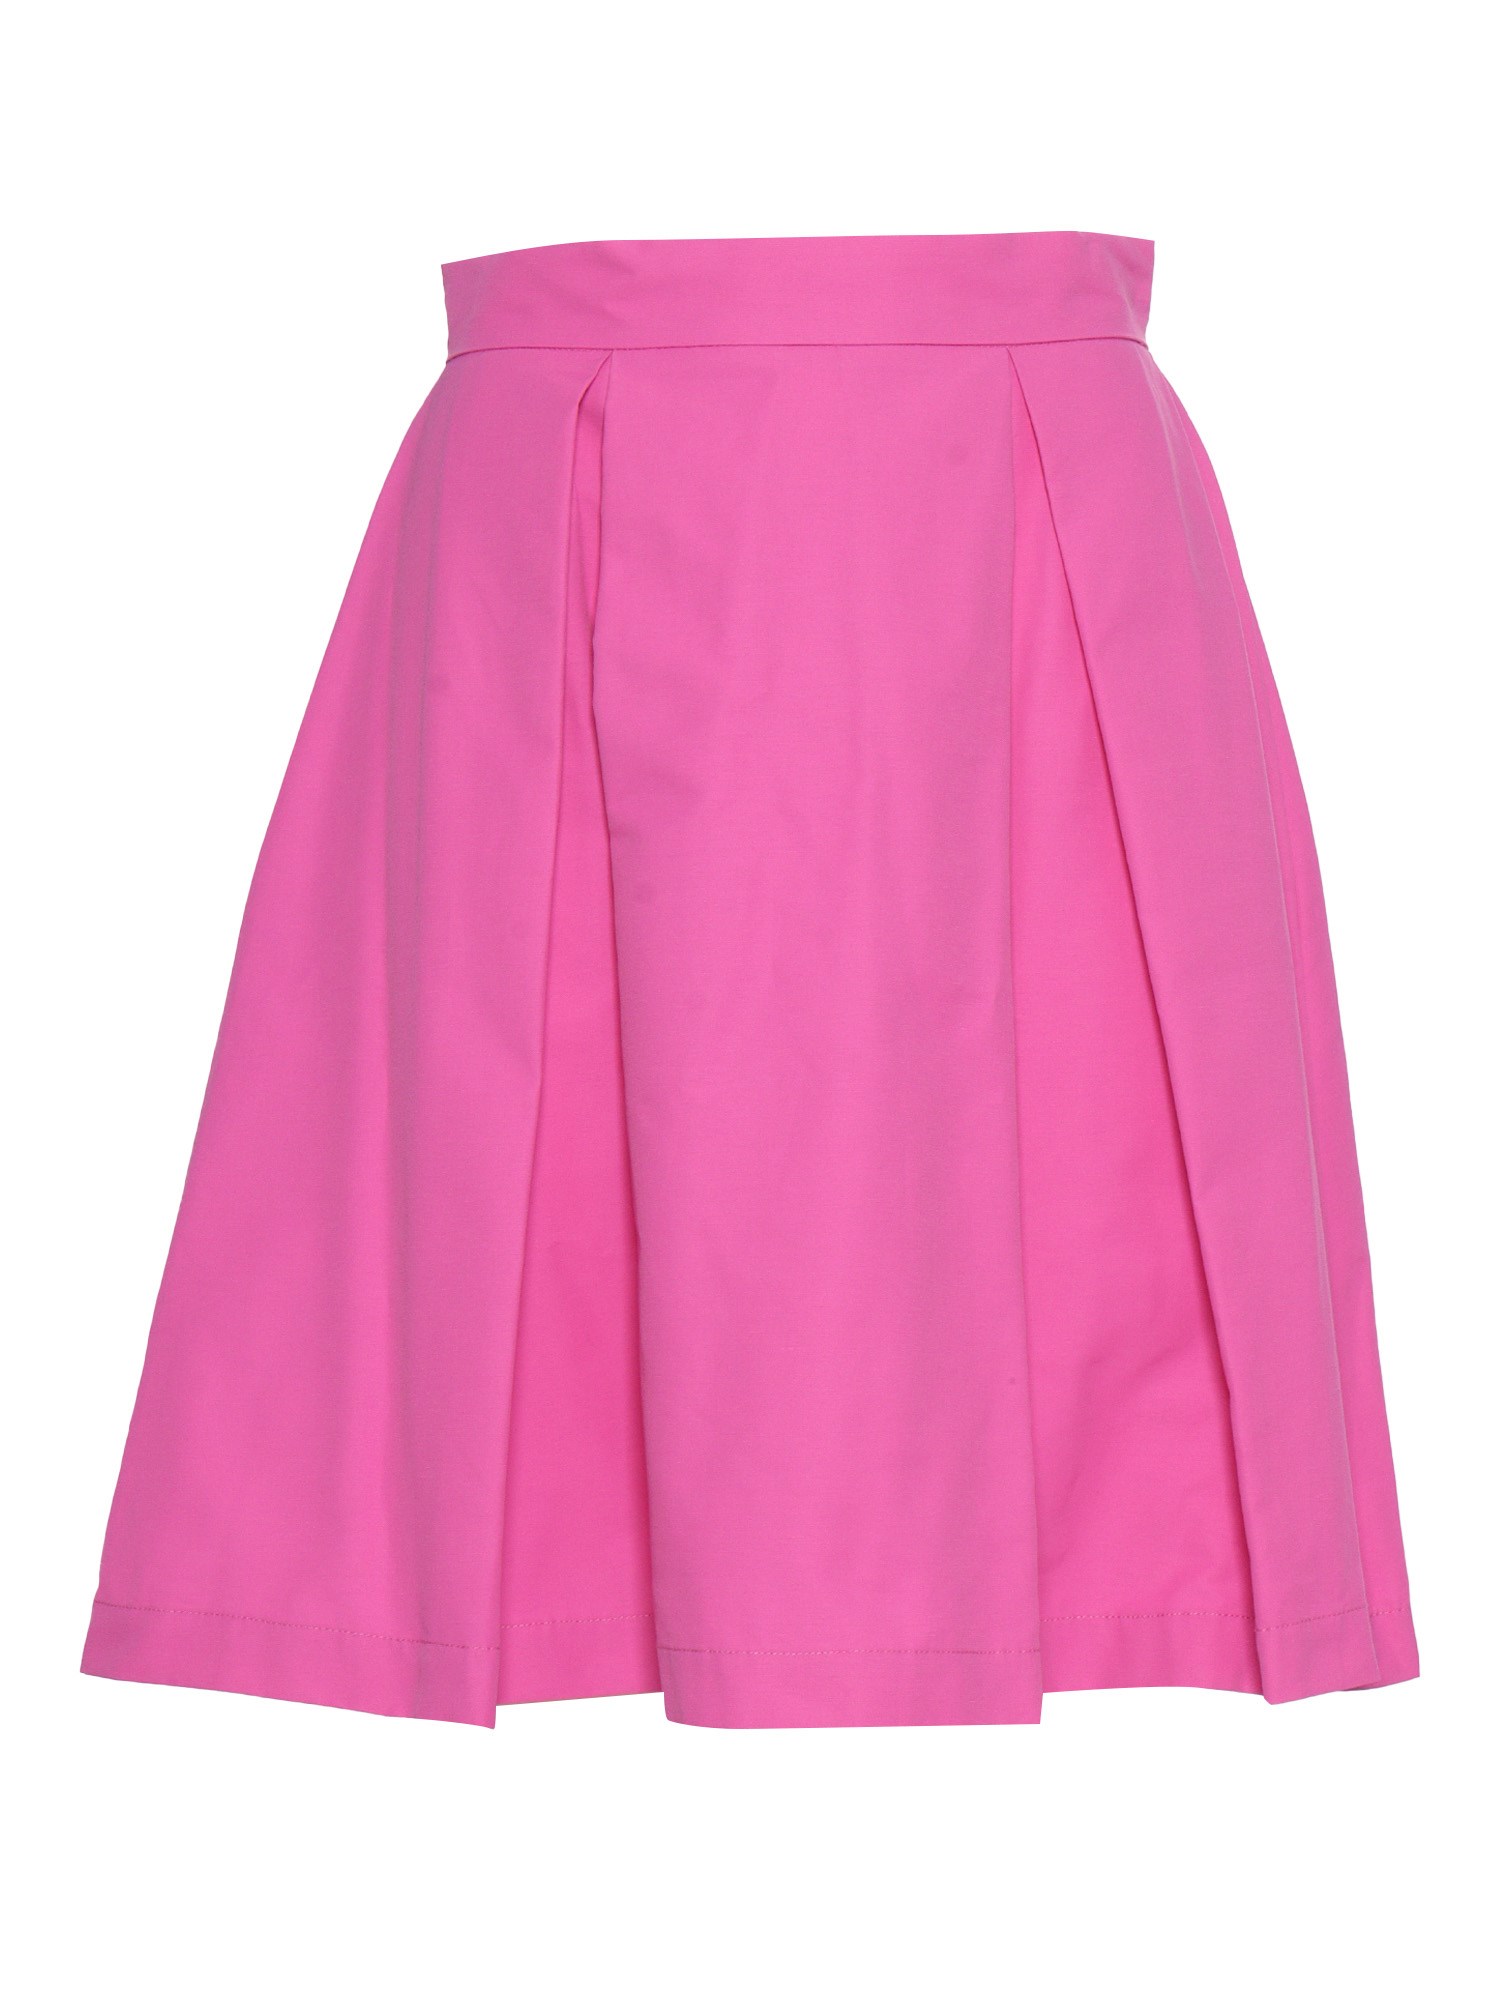 Max & Co Pink Flared Skirt